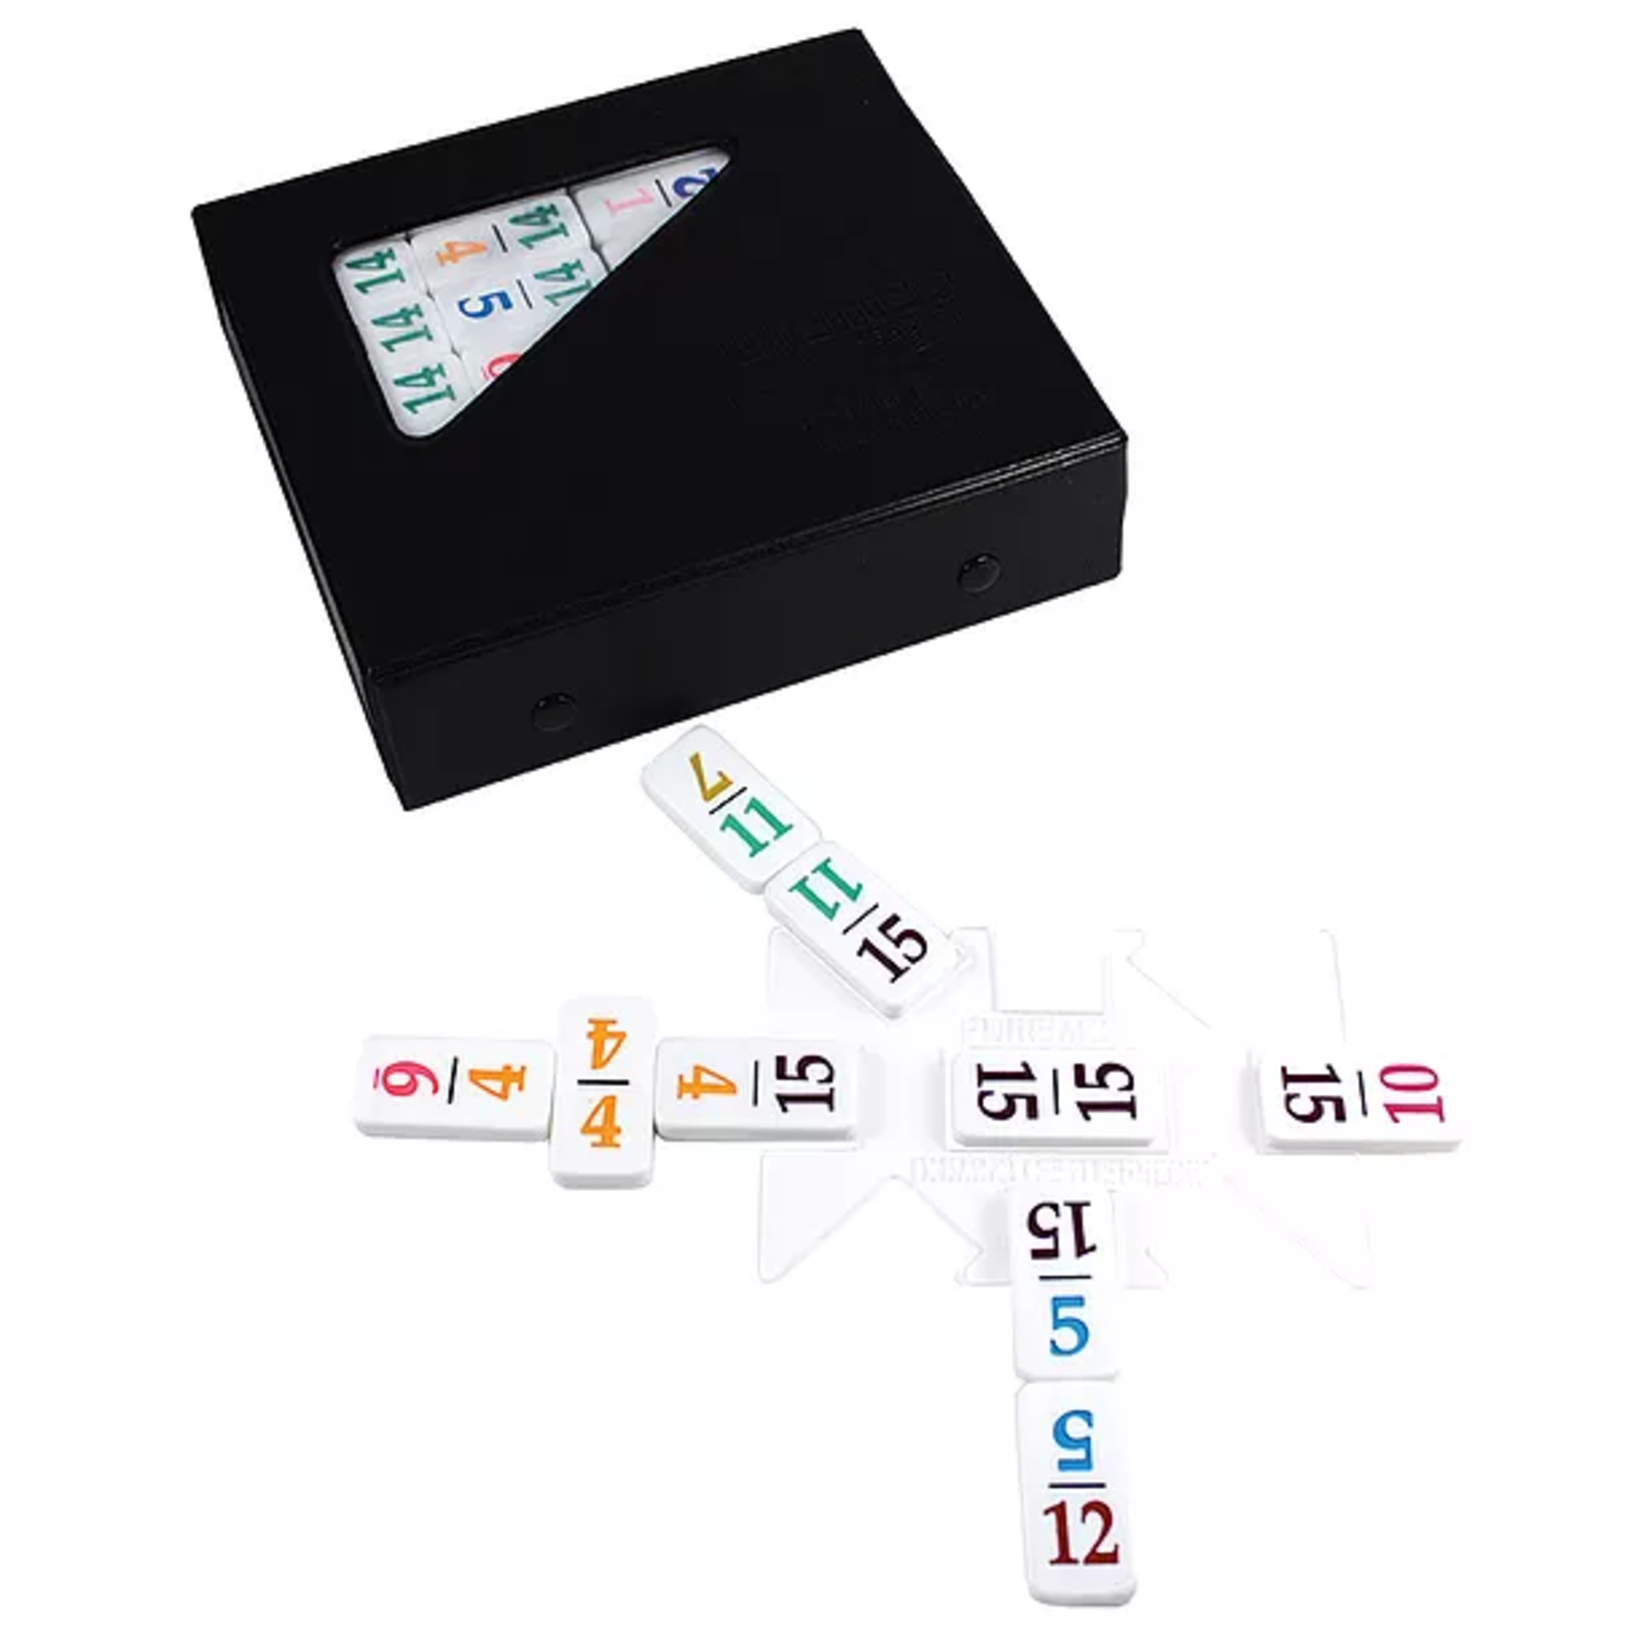 Puremco Double 15 Number Dominoes: Pro Size White/Color Numbers (UG)